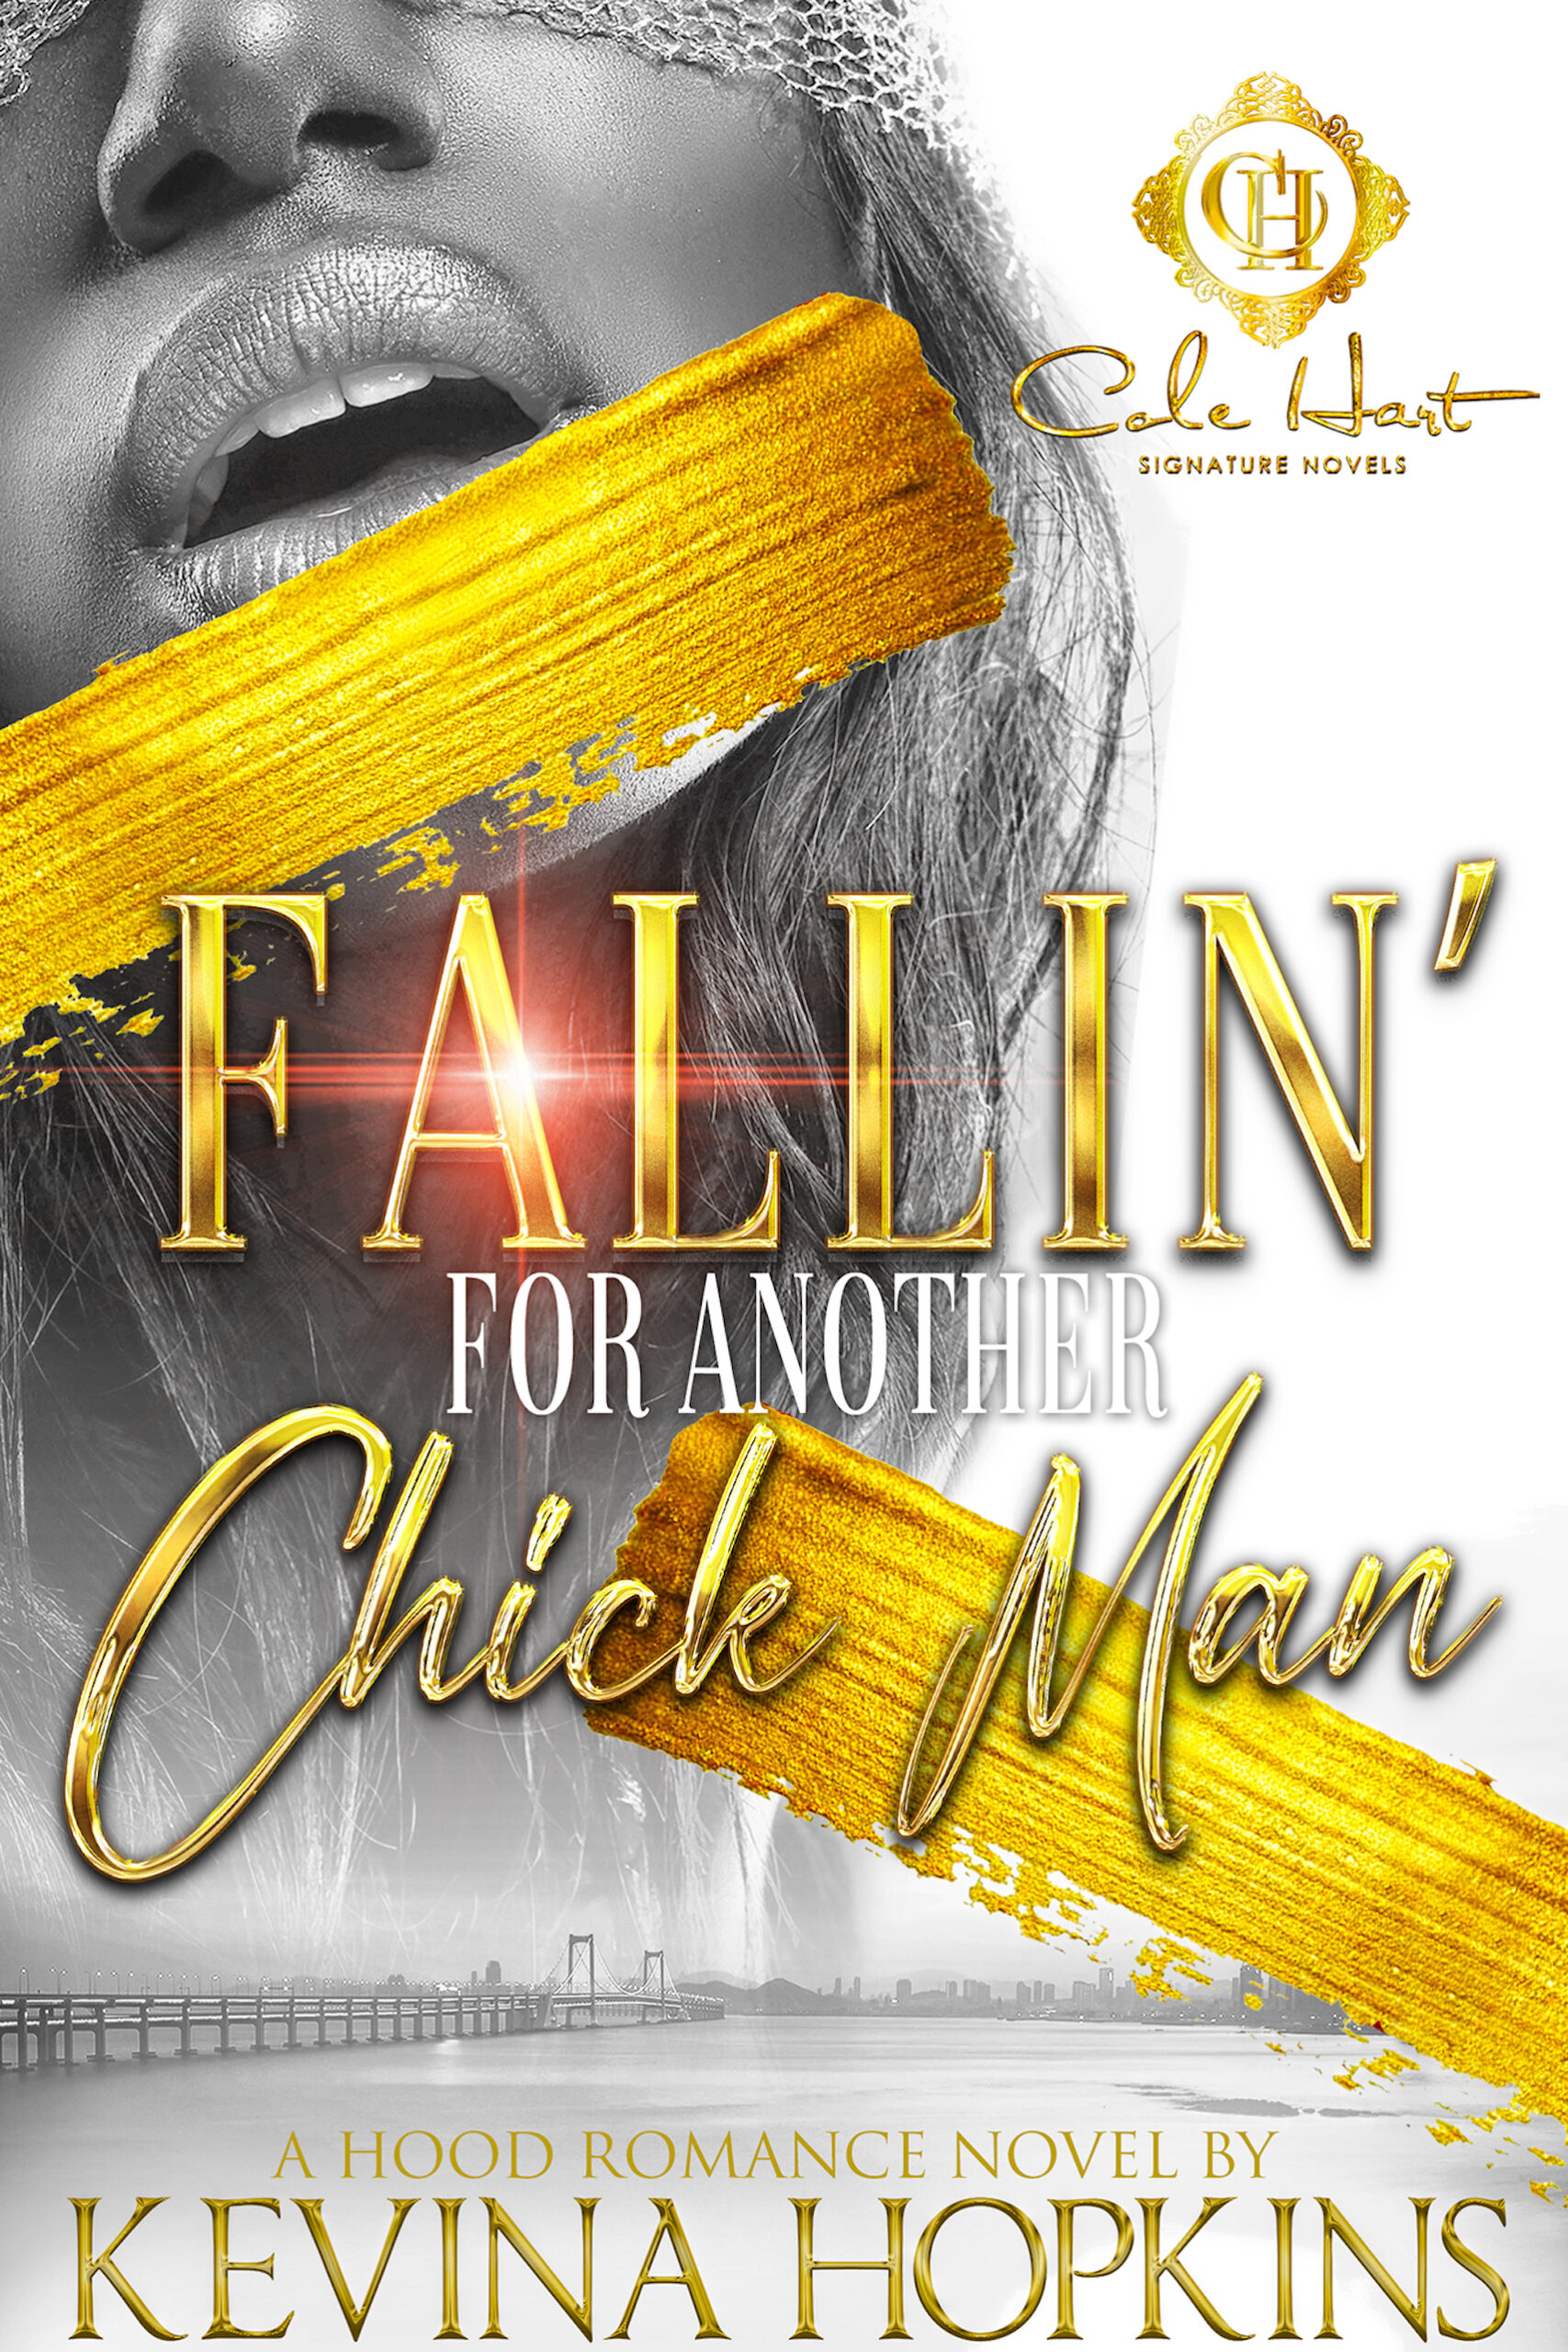 Fallin' For Another Chick's Man